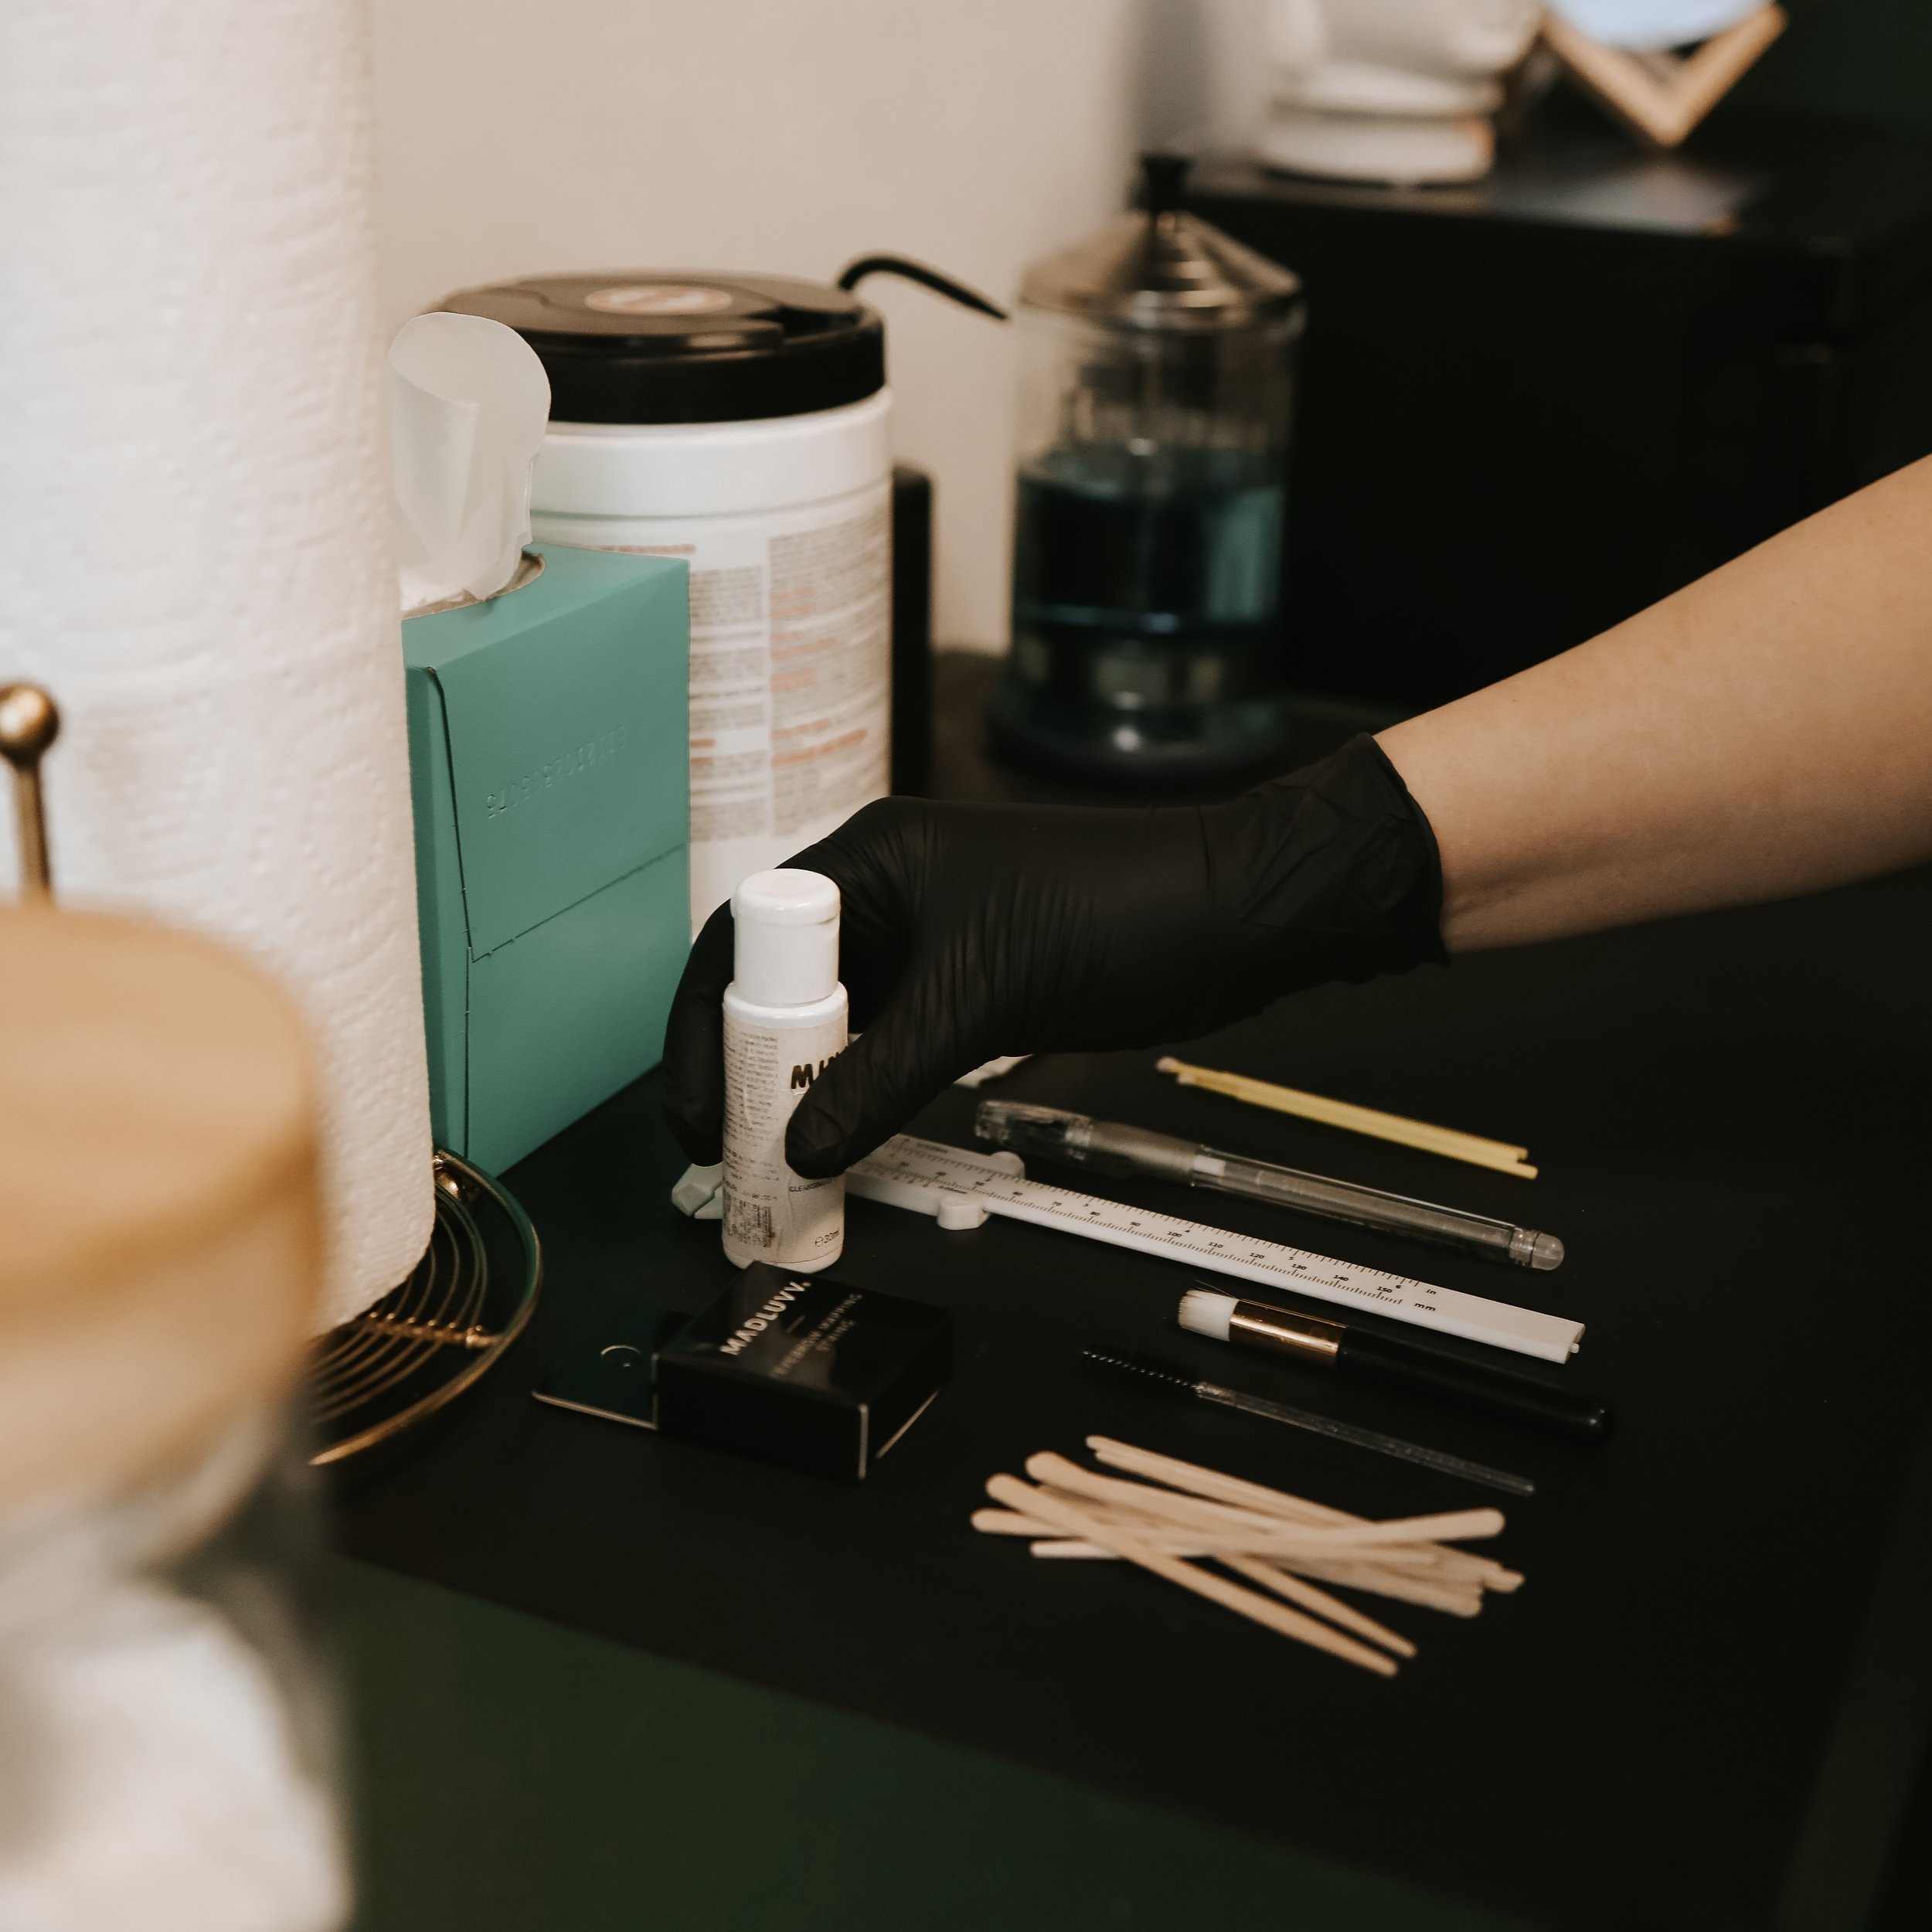 Peek into the magic behind the perfect brow! ✨ 
Behind the scenes of my brow appointment: where every detail counts. From a thorough cleanse and exfoliation to meticulous mapping and waxing, we&rsquo;re crafting your signature look with care and prec